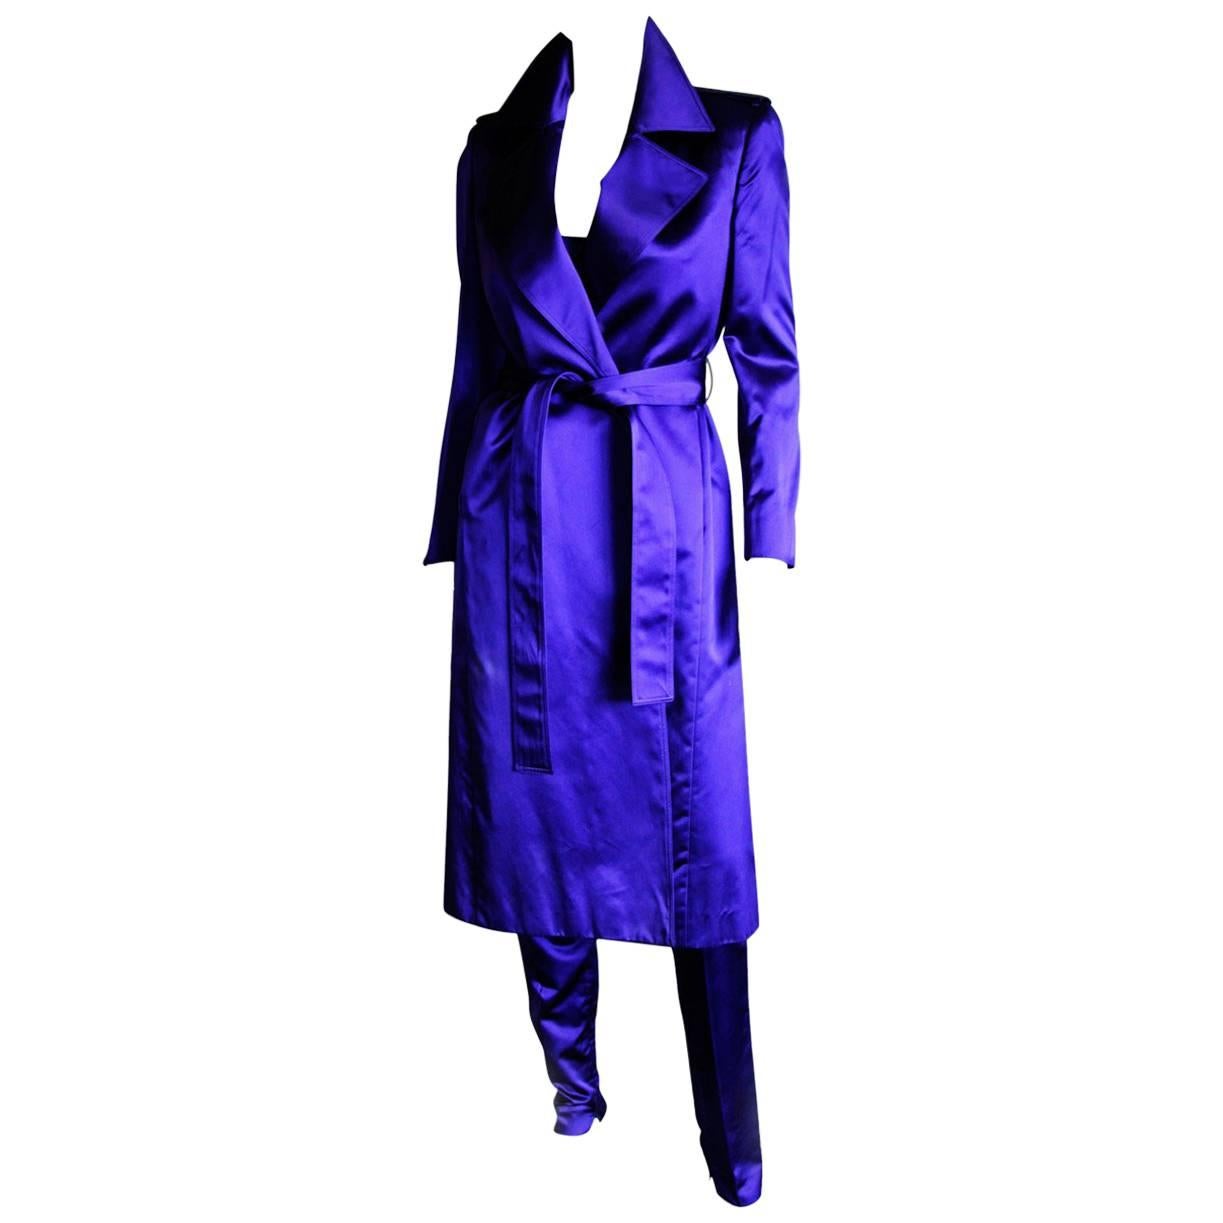 Gorgeous Tom Ford Gucci SS 2001 Electric Blue Silk Runway Coat, Bustier & Pants!